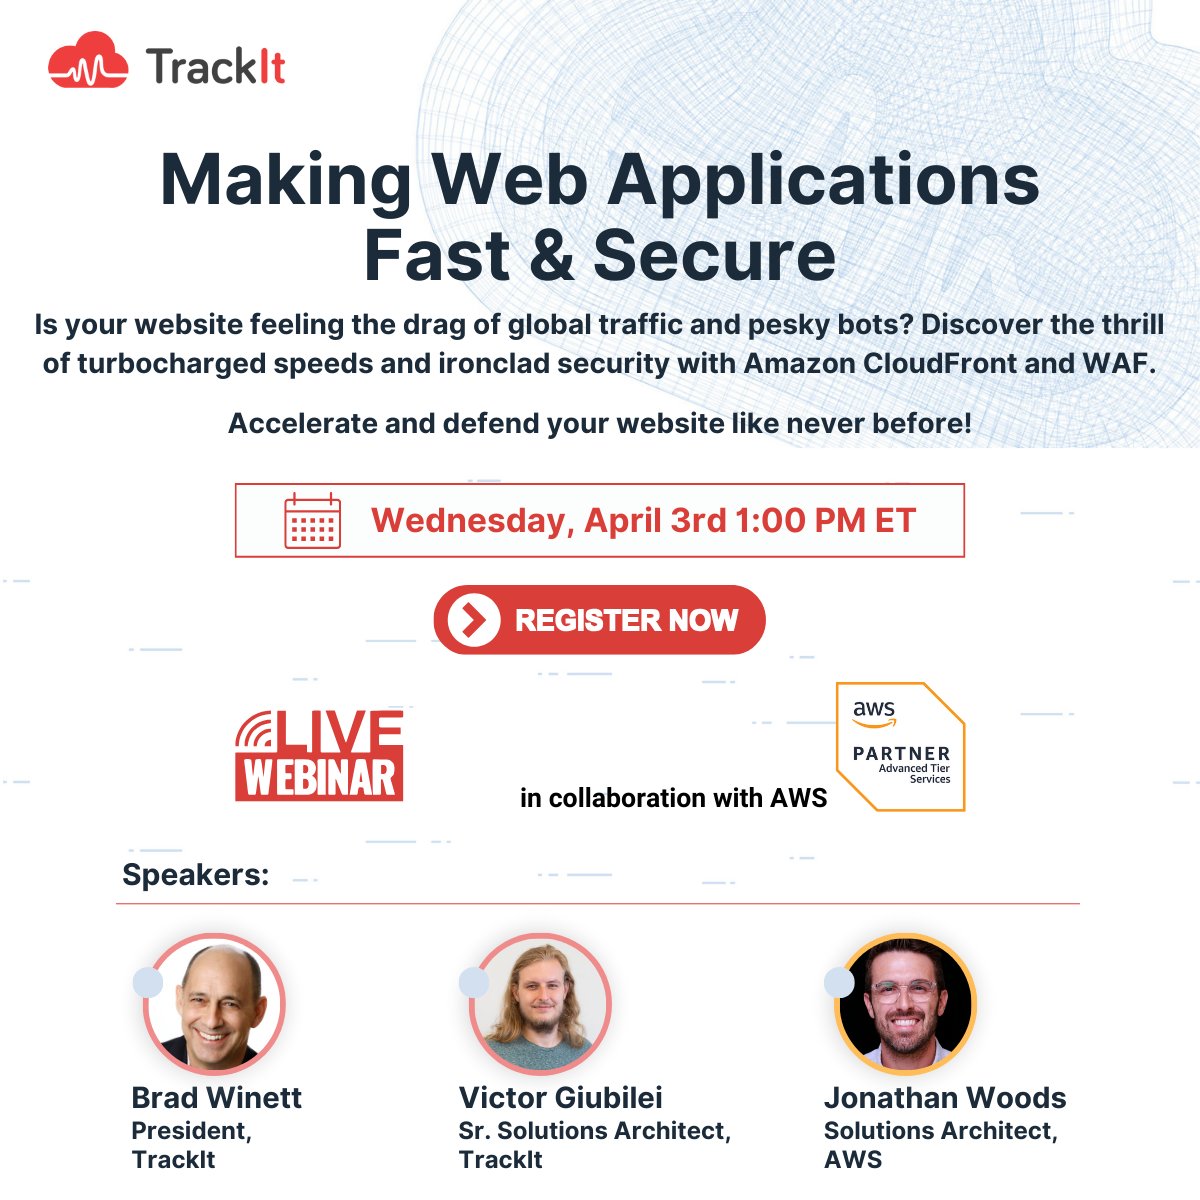 🚨 Register for TrackIt's #MakingWebAppsFastAndSecure webinar  on 4/3 tinyurl.com/y53ee82w

Learn how to supercharge ⚡️ and secure 🔒 your web apps with Amazon CloudFront and Web Application Firewall (WAF)!

#aws #cloudfront #apnproud #cloudcomputing #cloudsecurity #awscloud